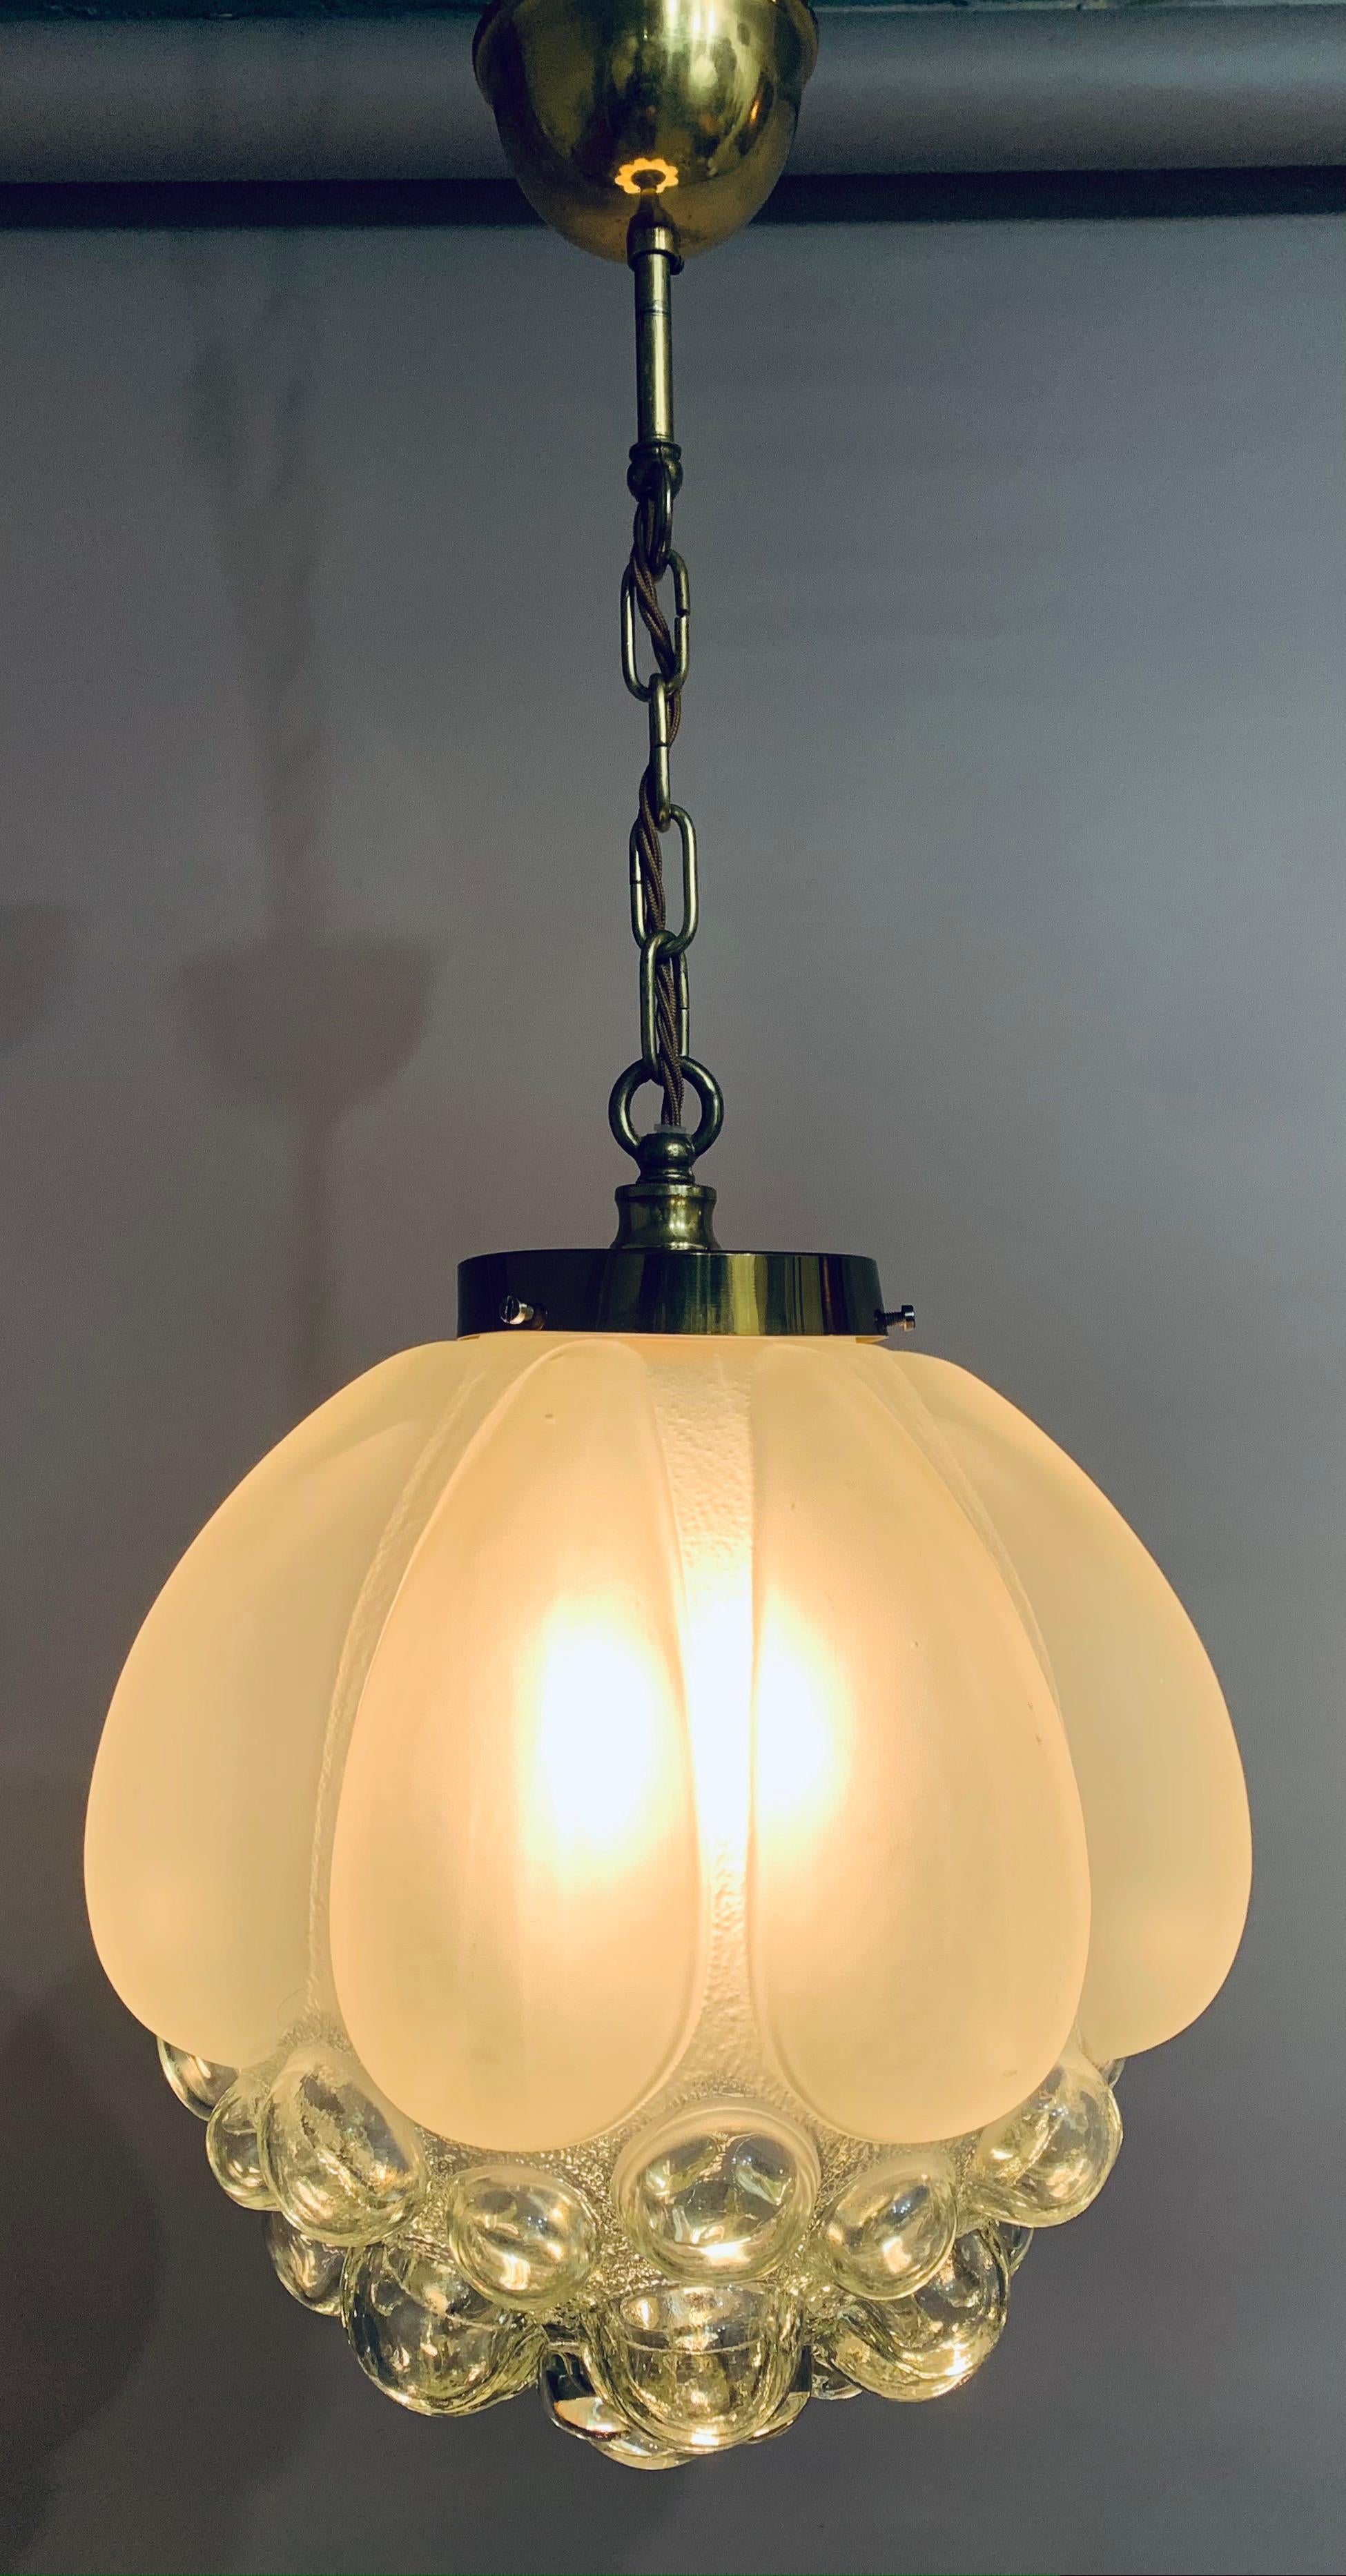 An interesting and beautifully designed hanging glass pendant lamp with frosted glass larger elongated bubbles at the top with clear glass bubbles underneath. The shade hangs from a polished brass fitting with a lovely deep patina which is secured